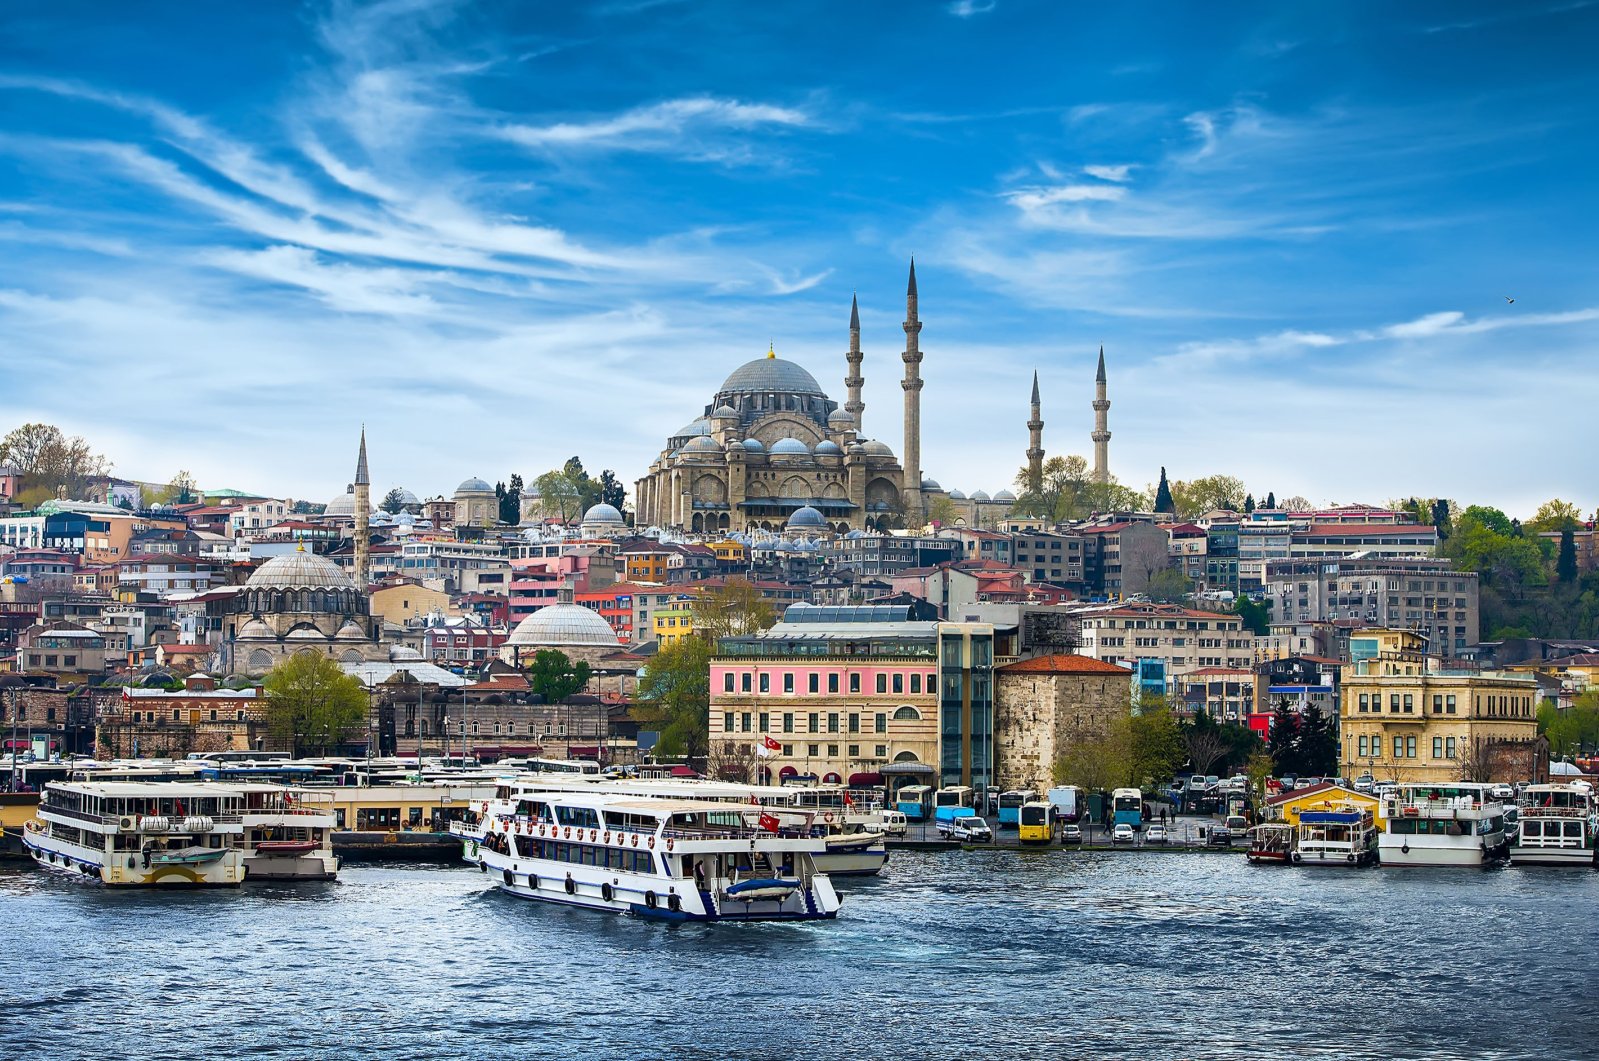 A view from Istanbul, Turkey, Jan. 13, 2022. (ShutterStock Photo)